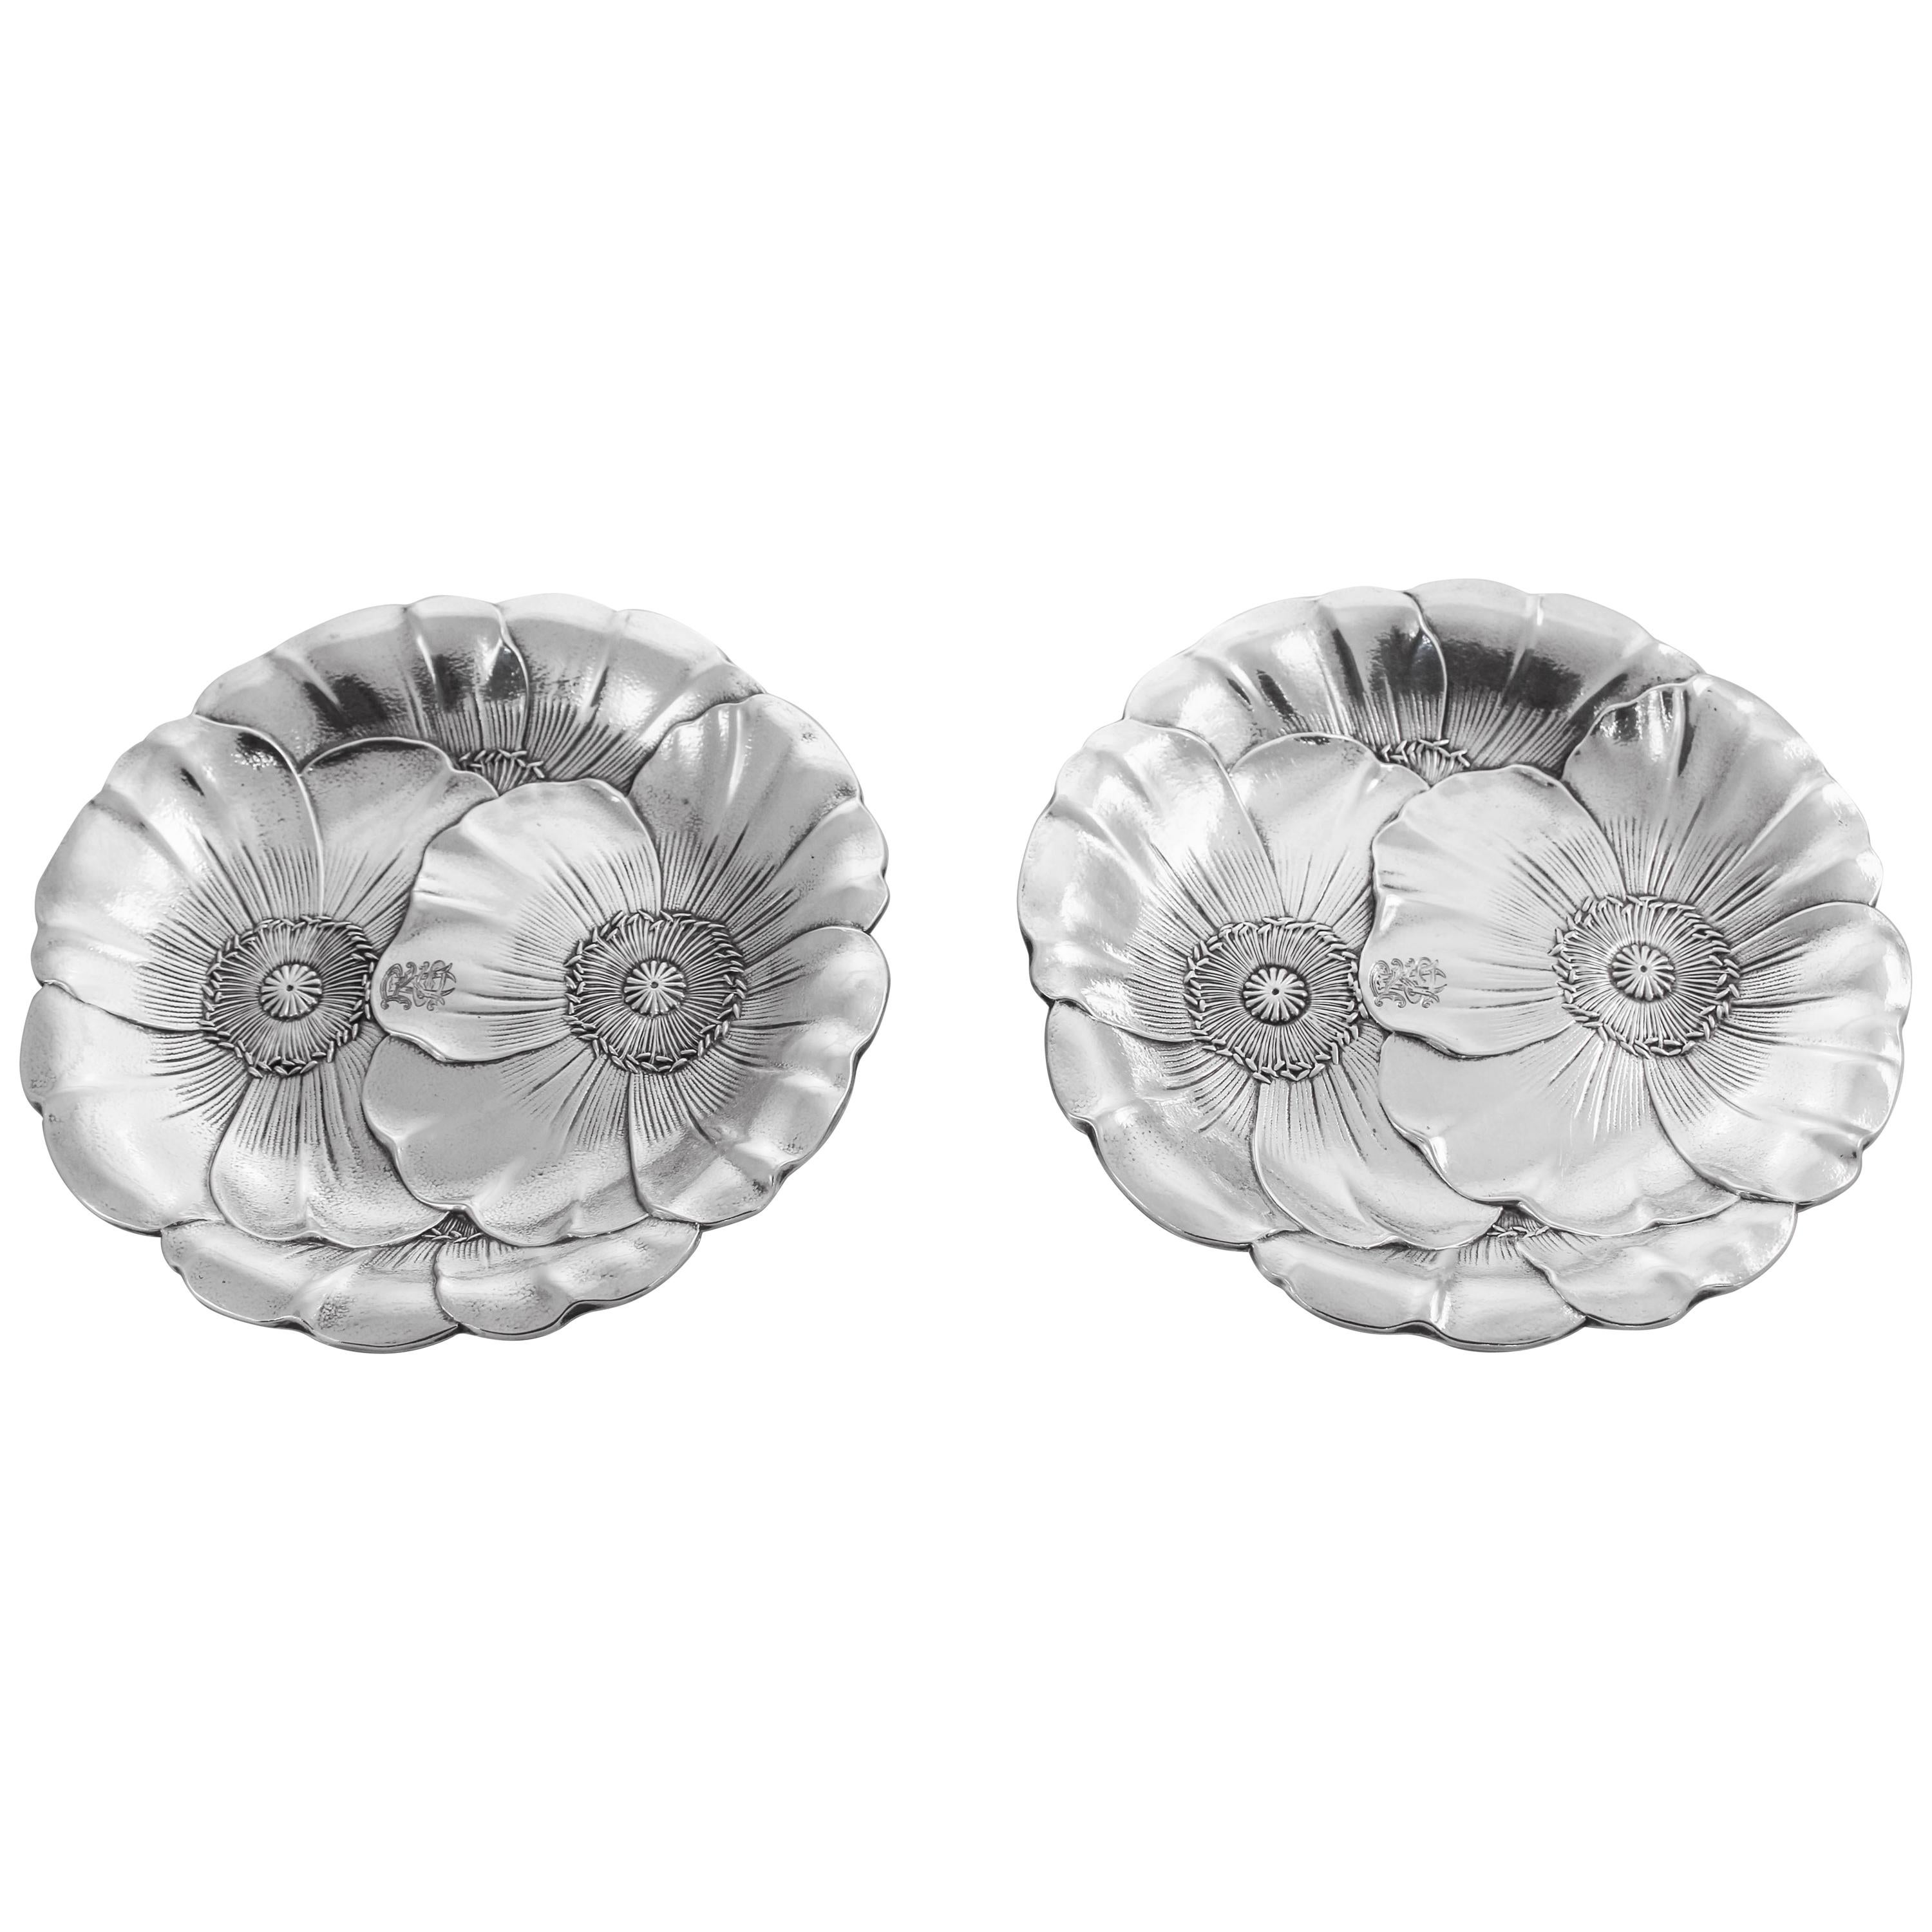 Pair of Sterling Dishes